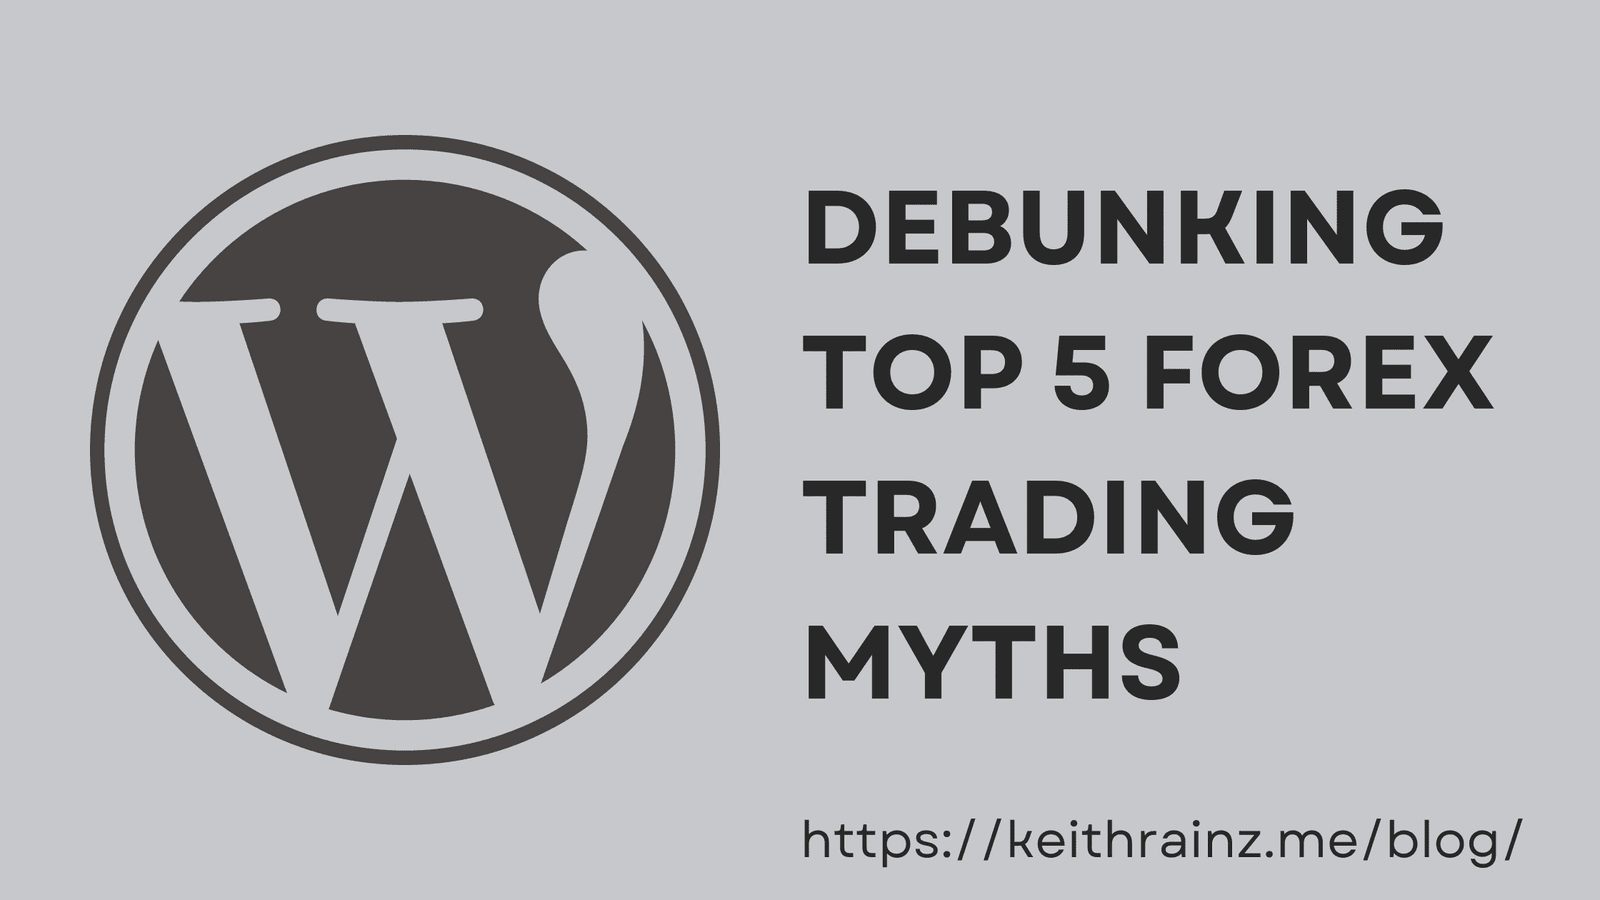 Debunking top 5 forex trading myths